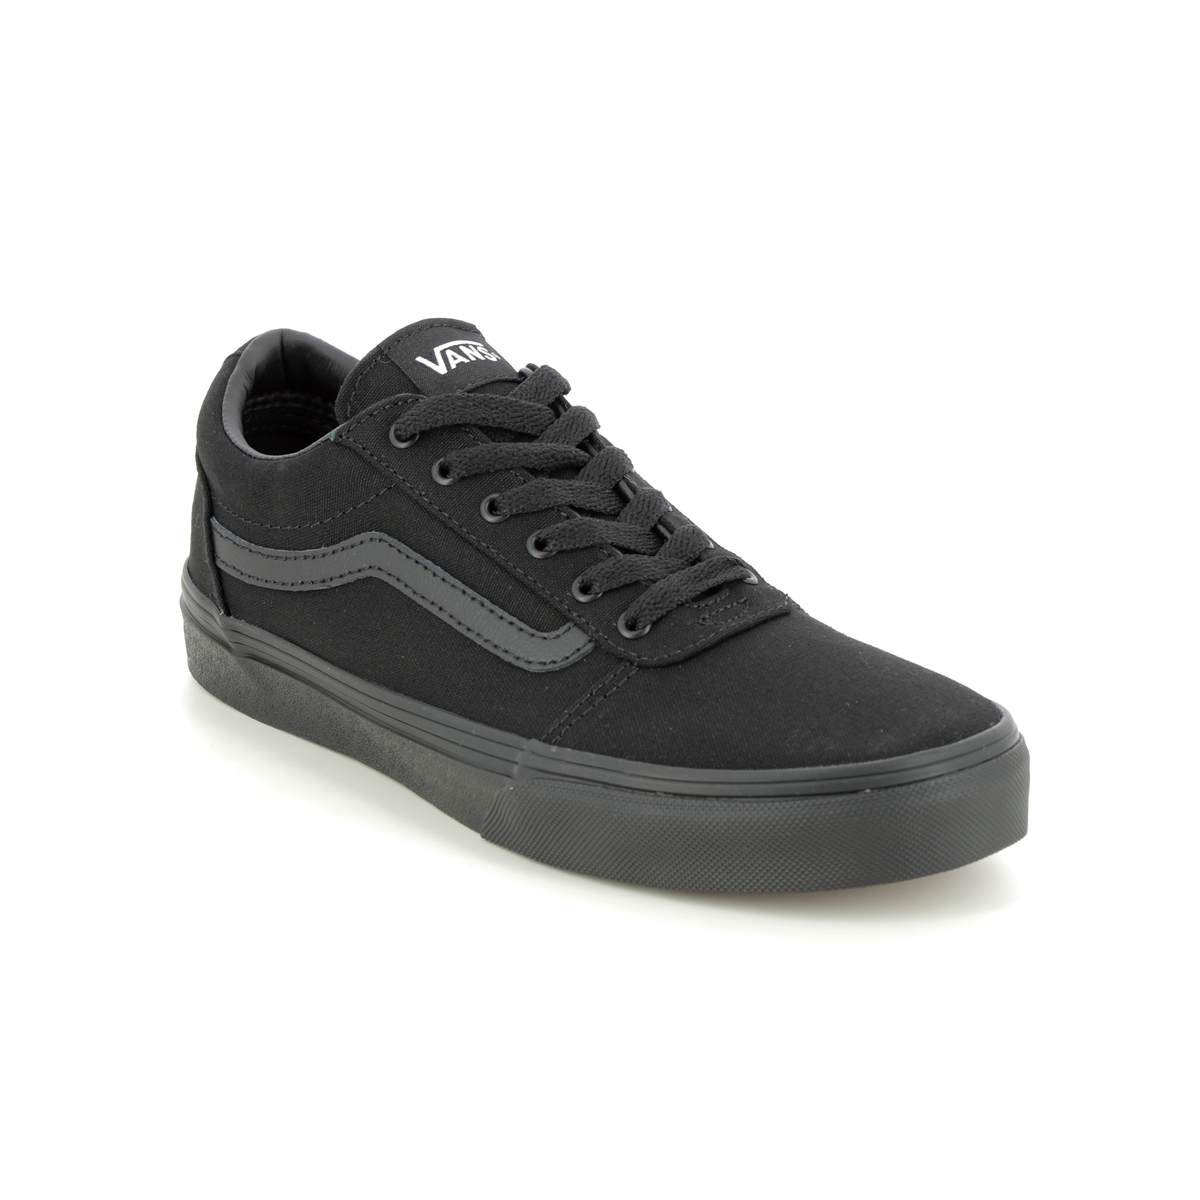 Vans Ward Yth Black Kids Trainers  Vn0A38J91-861 In Size 3 In Plain Black Vans Boys Trainers For kids